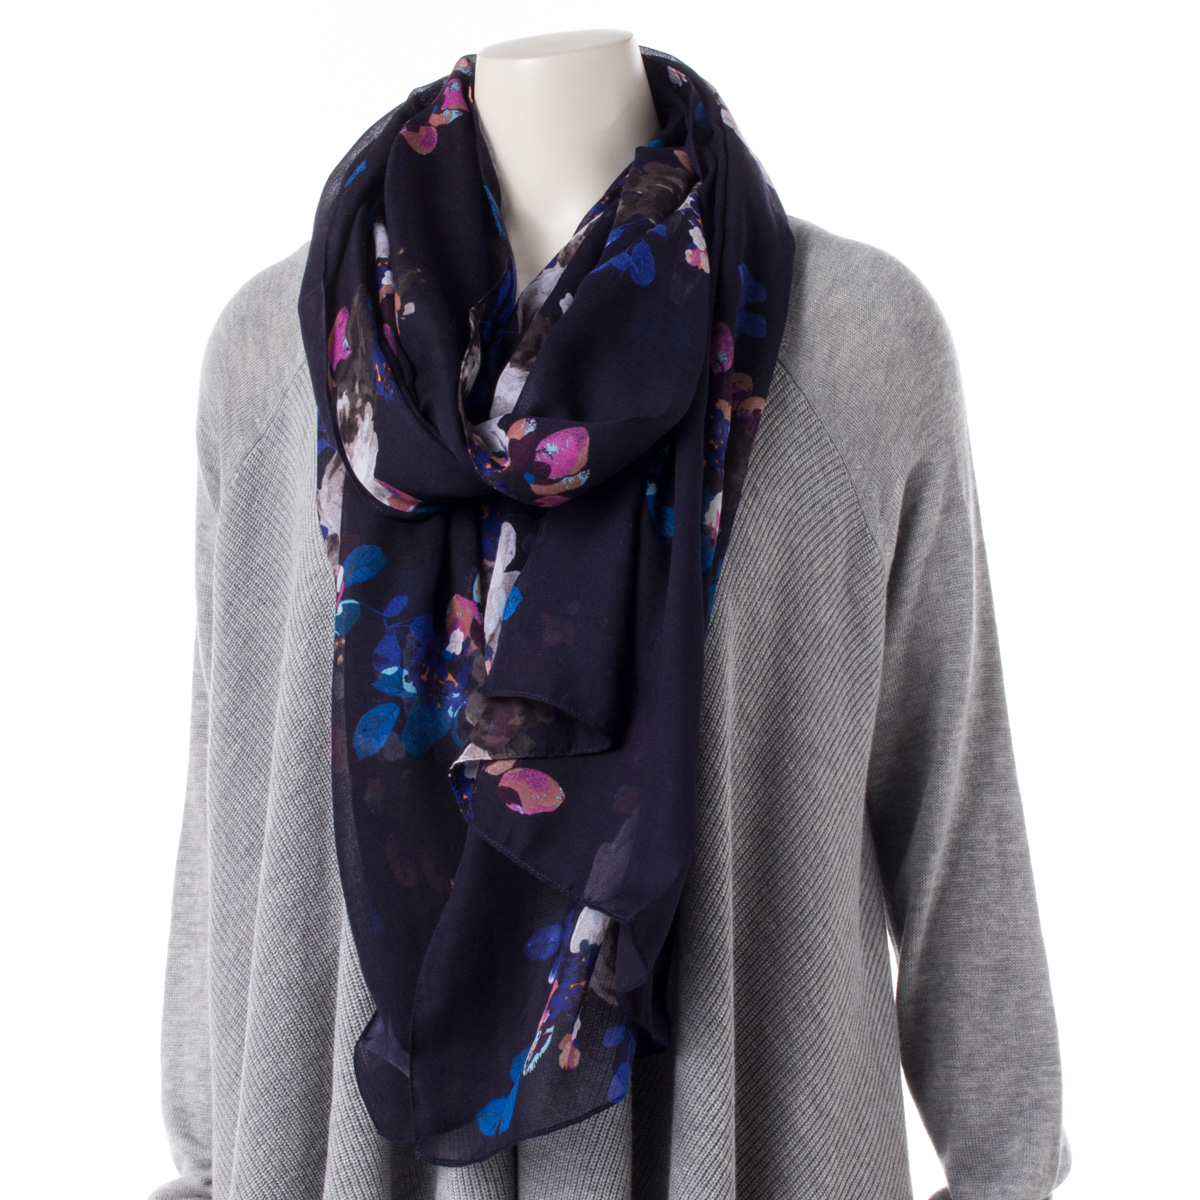 Joules Women's Wensley Scarf